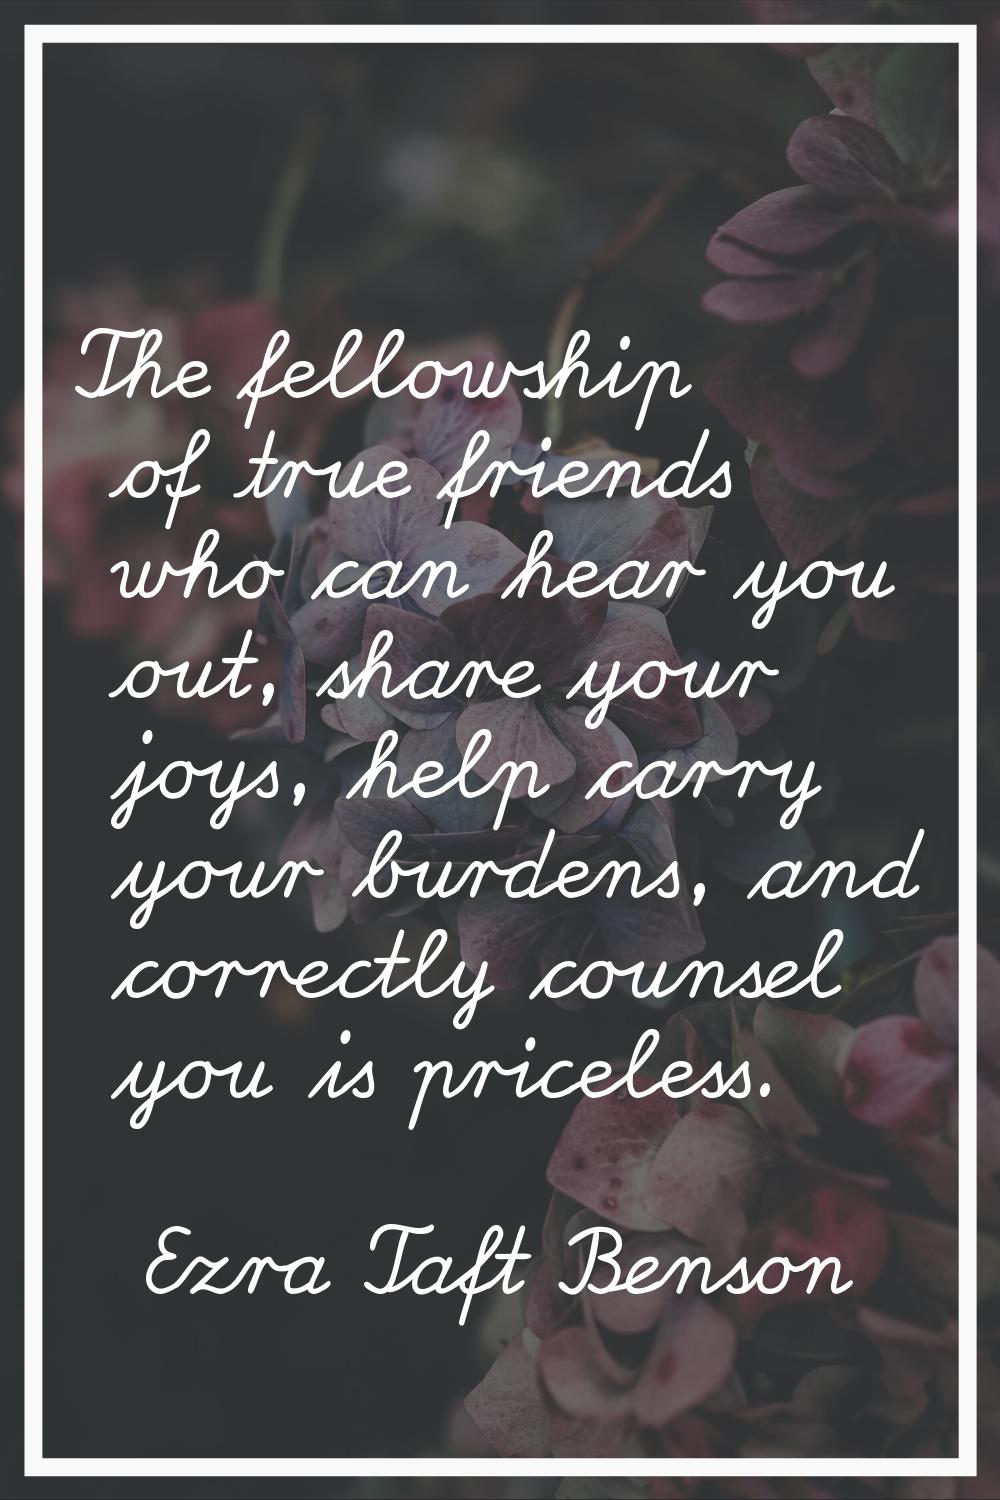 The fellowship of true friends who can hear you out, share your joys, help carry your burdens, and 